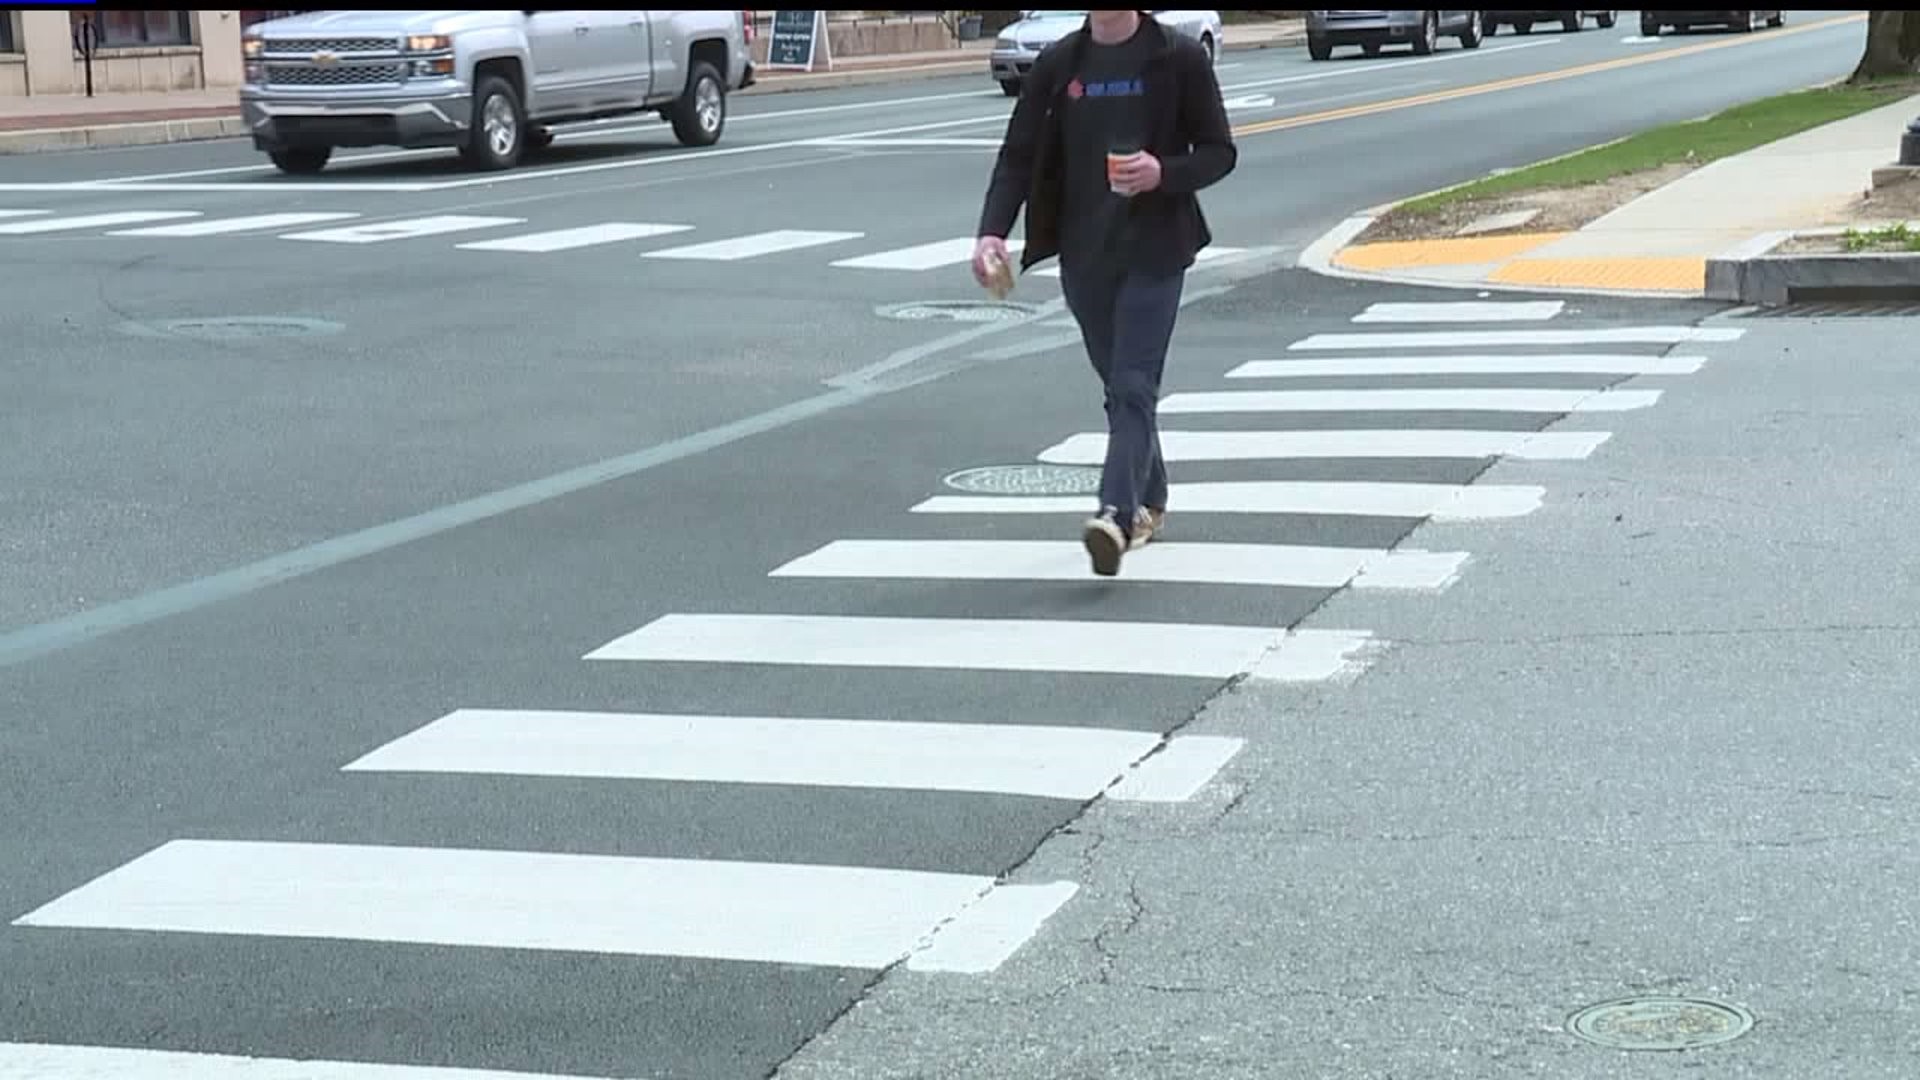 More pedestrians dying locally and nationally